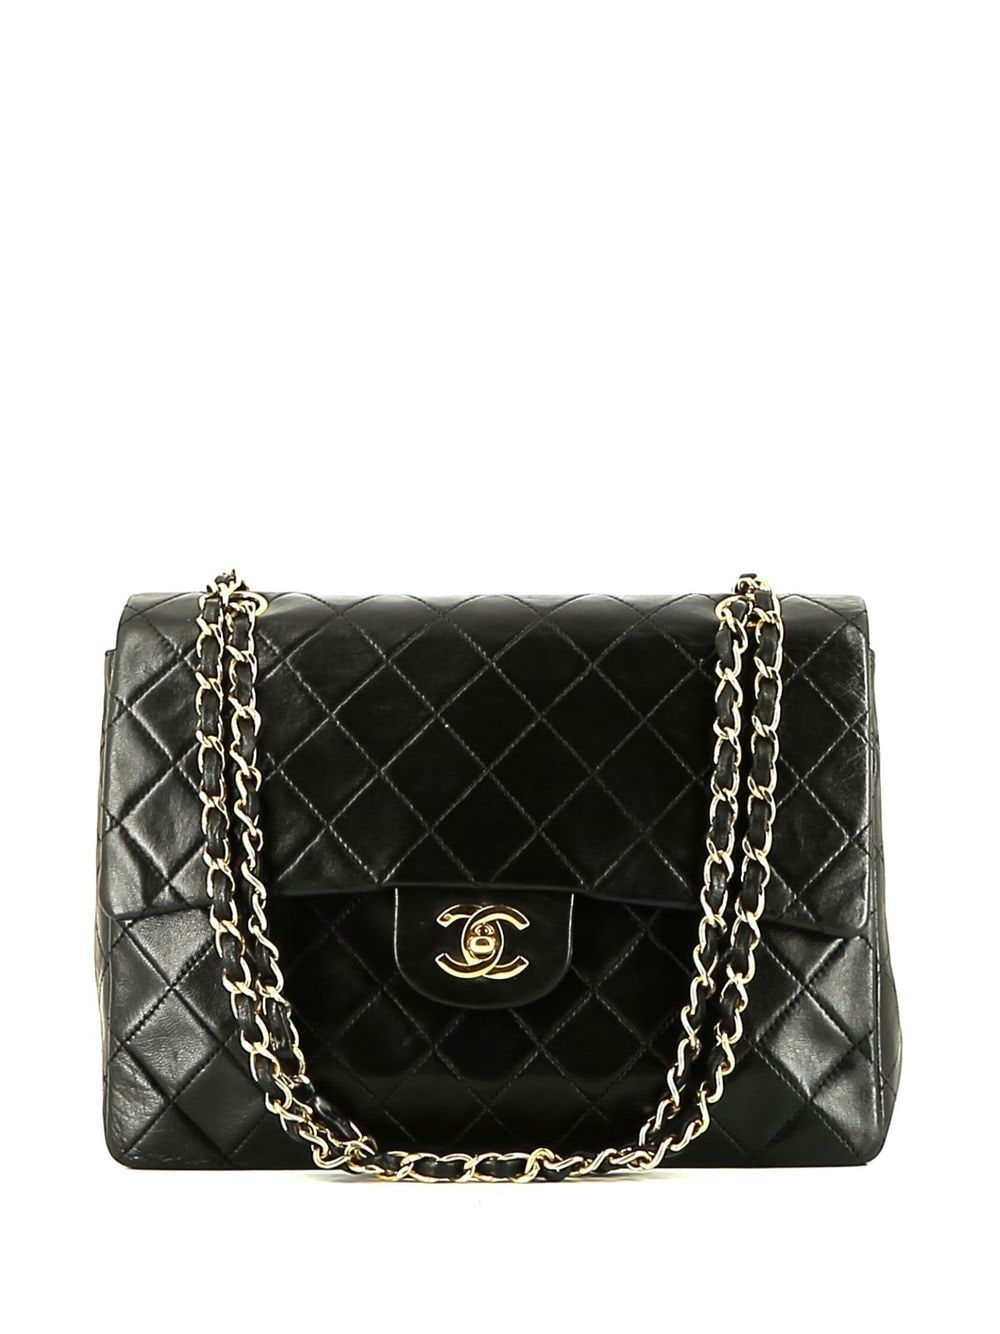 Pre-owned Chanel 1991 Diamond Quilted Shoulder Bag In Black